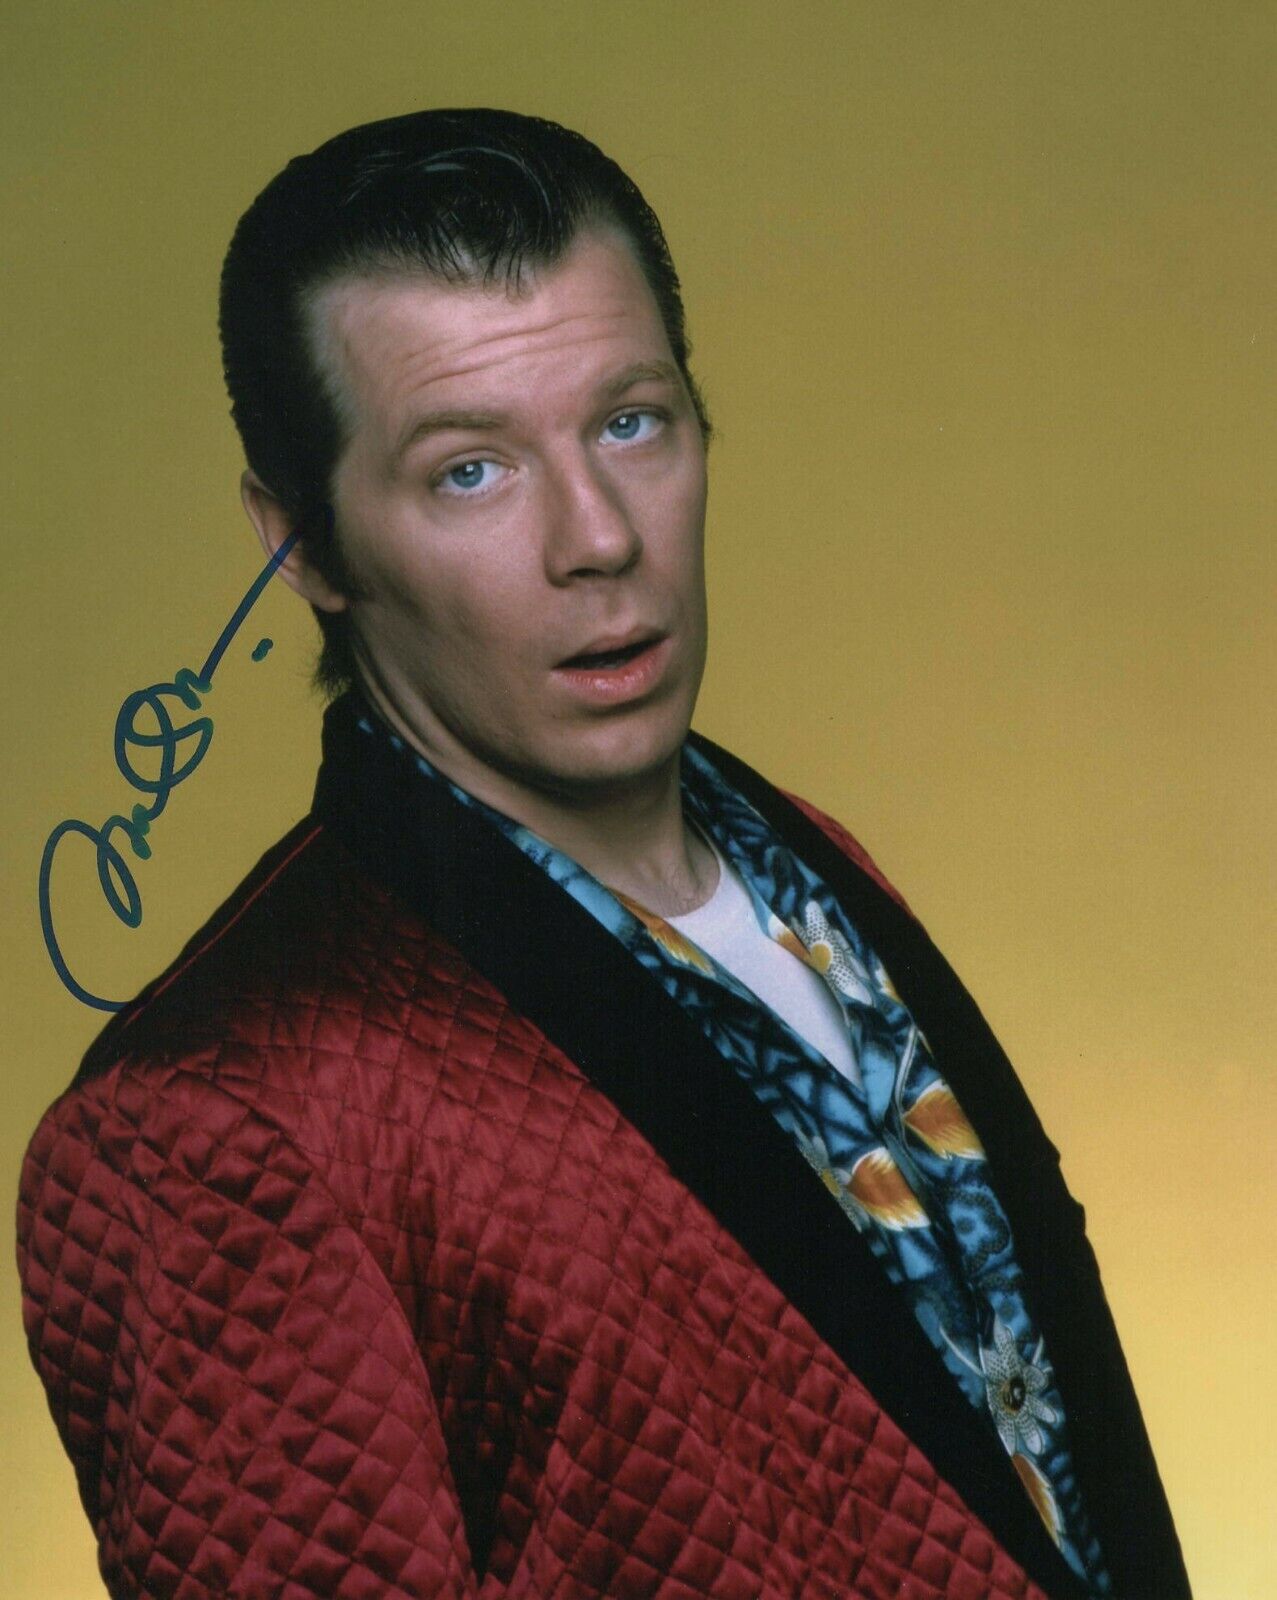 MICHAEL MCKEAN SIGNED AUTOGRAPH 8X10 Photo Poster painting - LAVERNE AND SHIRLEY, SPINAL TAP